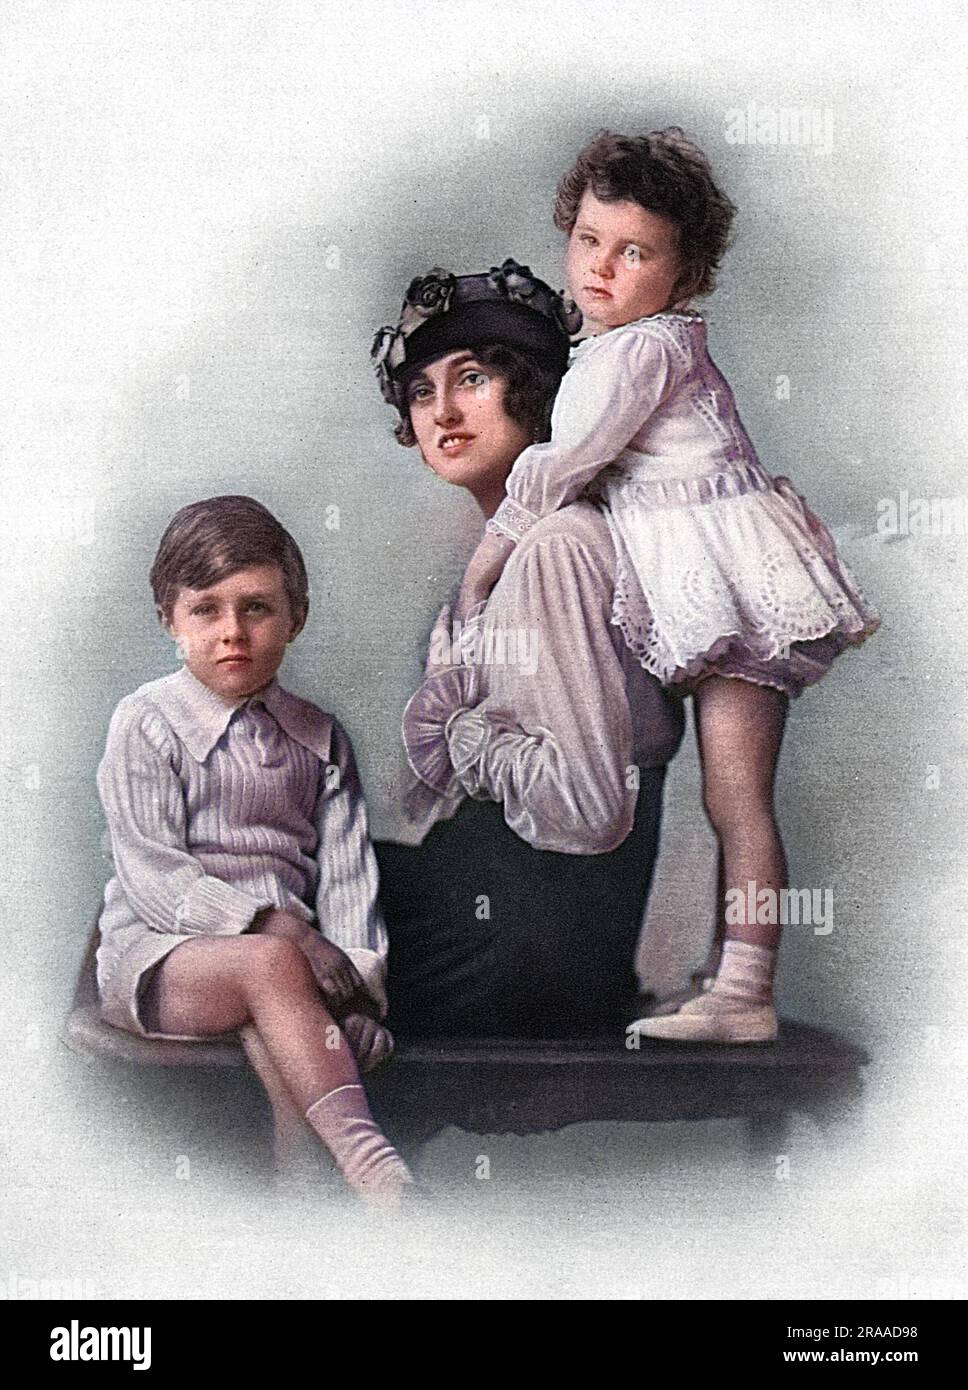 Countess Poulett, formerly the actress Sylvia Storey (1889-1947) remembered as a Gibson Girl and for her role of Lady Hamilton in, 'The Gay Gordons.'  Married the 7th Earl Poulett in 1908 and pictured with her children, Viscount Hinton and Lady Bridgett Poulett, born 1909 and 1912 respectively.  She was the daughter of Fred Storey the well-known comedian, one of Leslie-Farren-Storey group in the days of Gaiety burlesque.  Earl Poulett was an officer in the Royal Horse Artillery (Territorials) and succeeded his father as 7th Earl in 1899.  He died of influenza in the epidemic of 1918.  His son Stock Photo